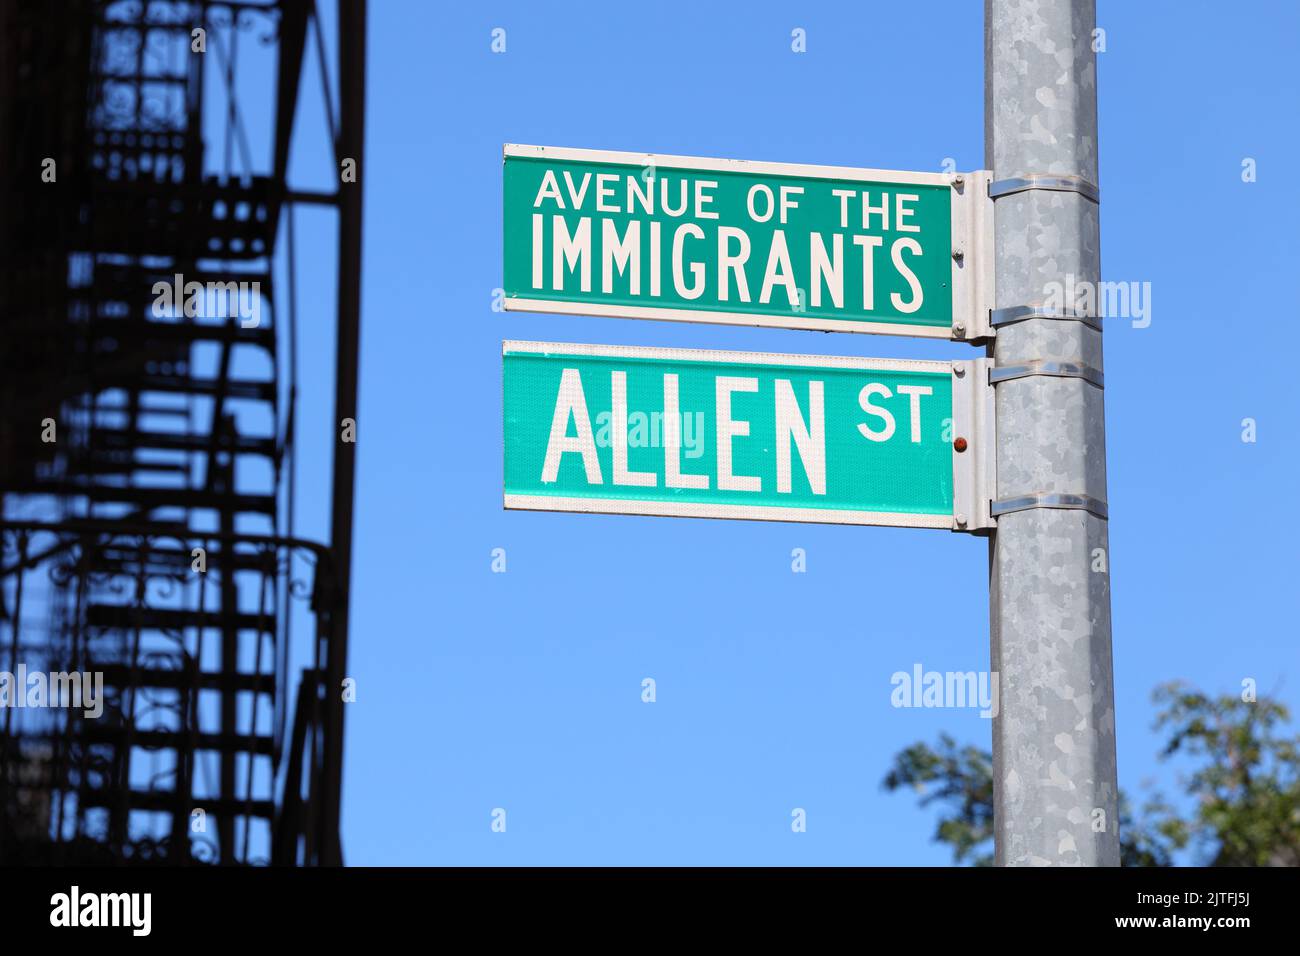 Avenue of the Immigrants and Allen Street signs in Manhattan's Chinatown/Lower East Side, New York. Foto Stock